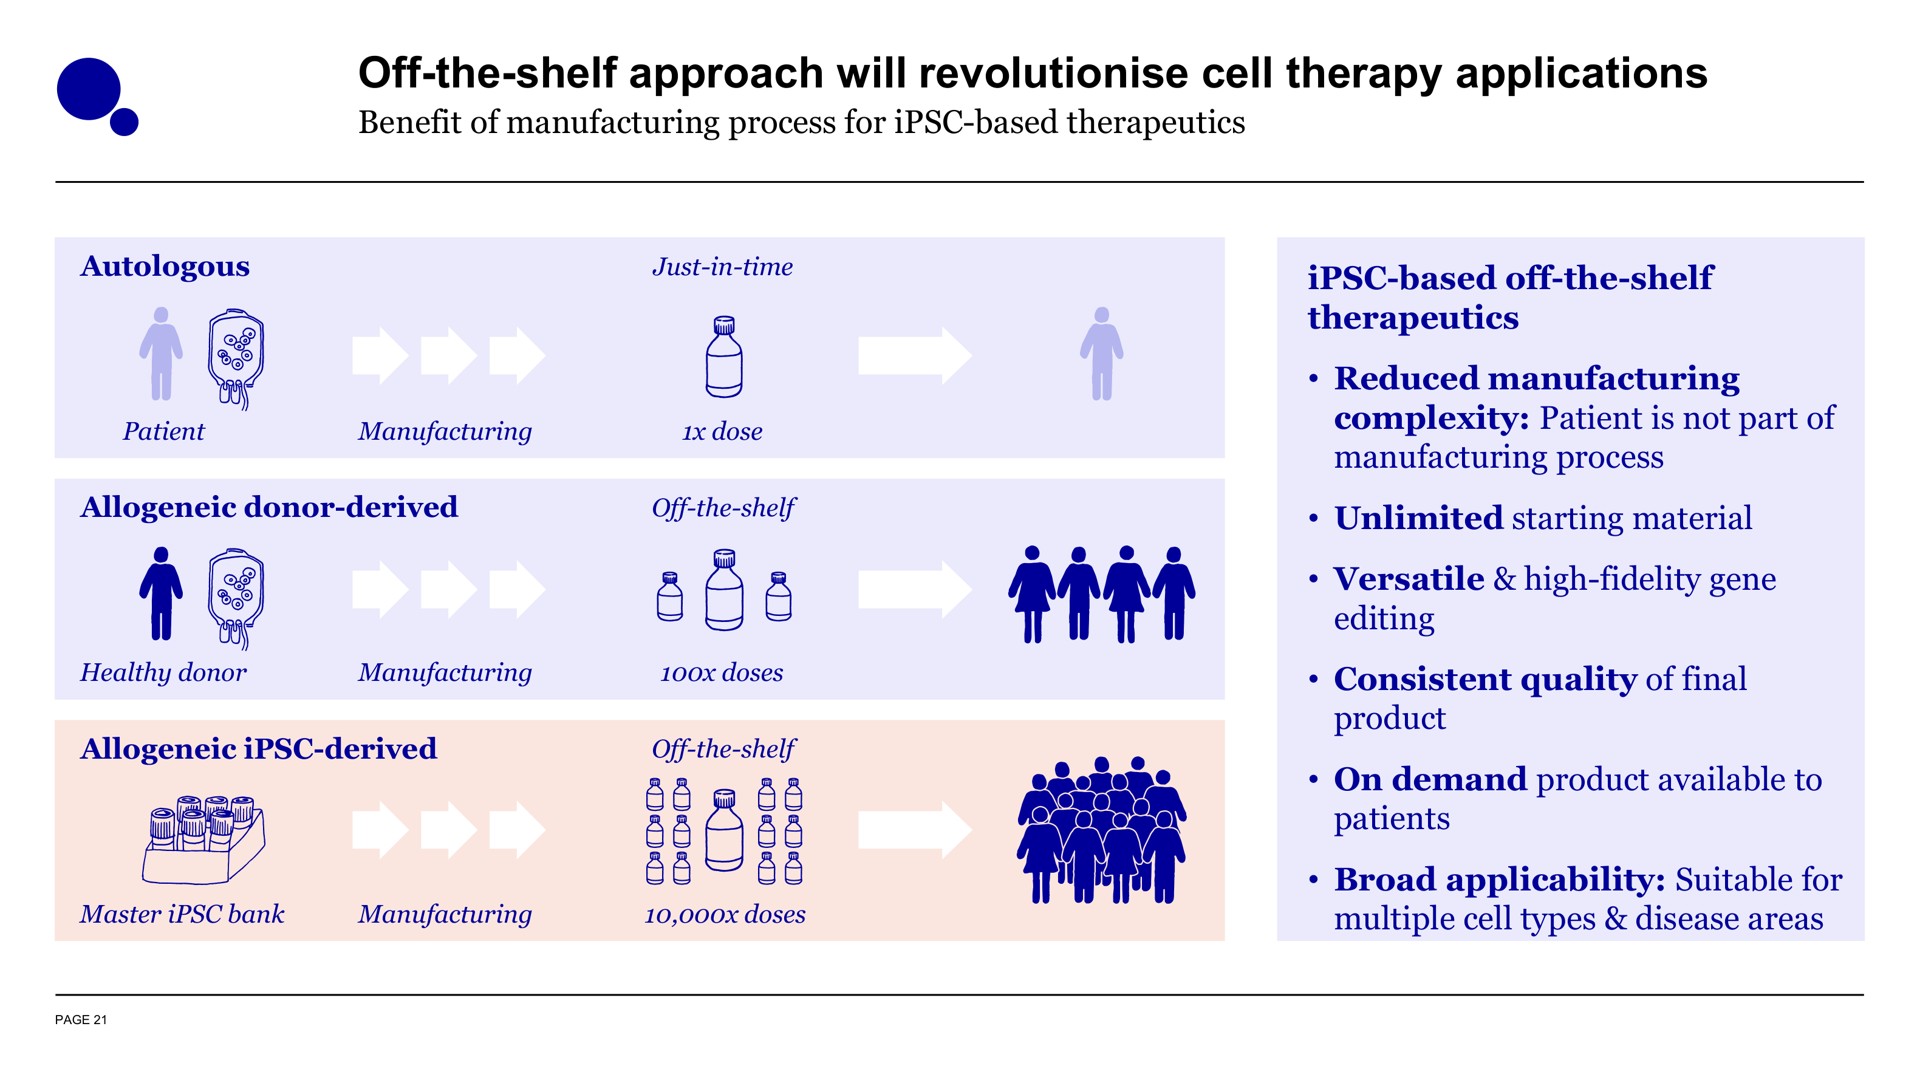 off the shelf approach will cell therapy applications | Evotec